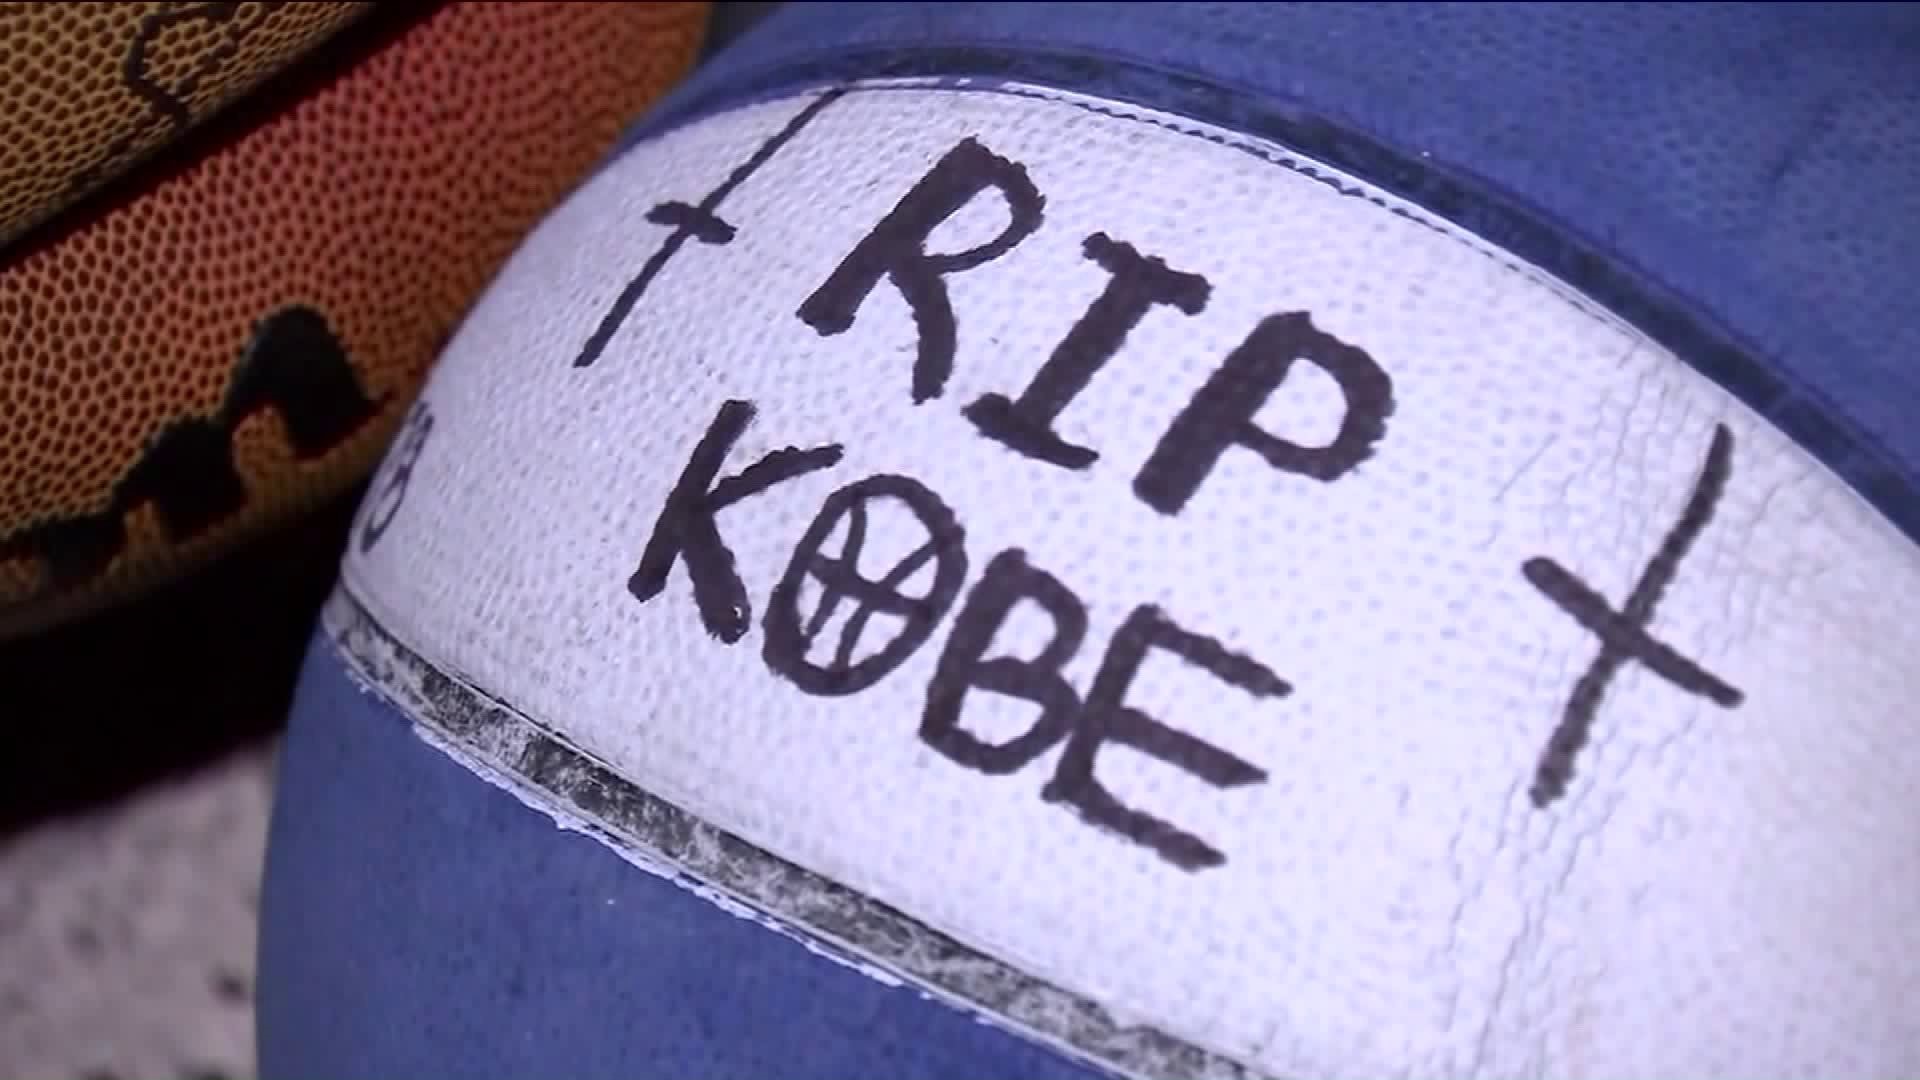 UConn fans react to passing of Kobe Bryant